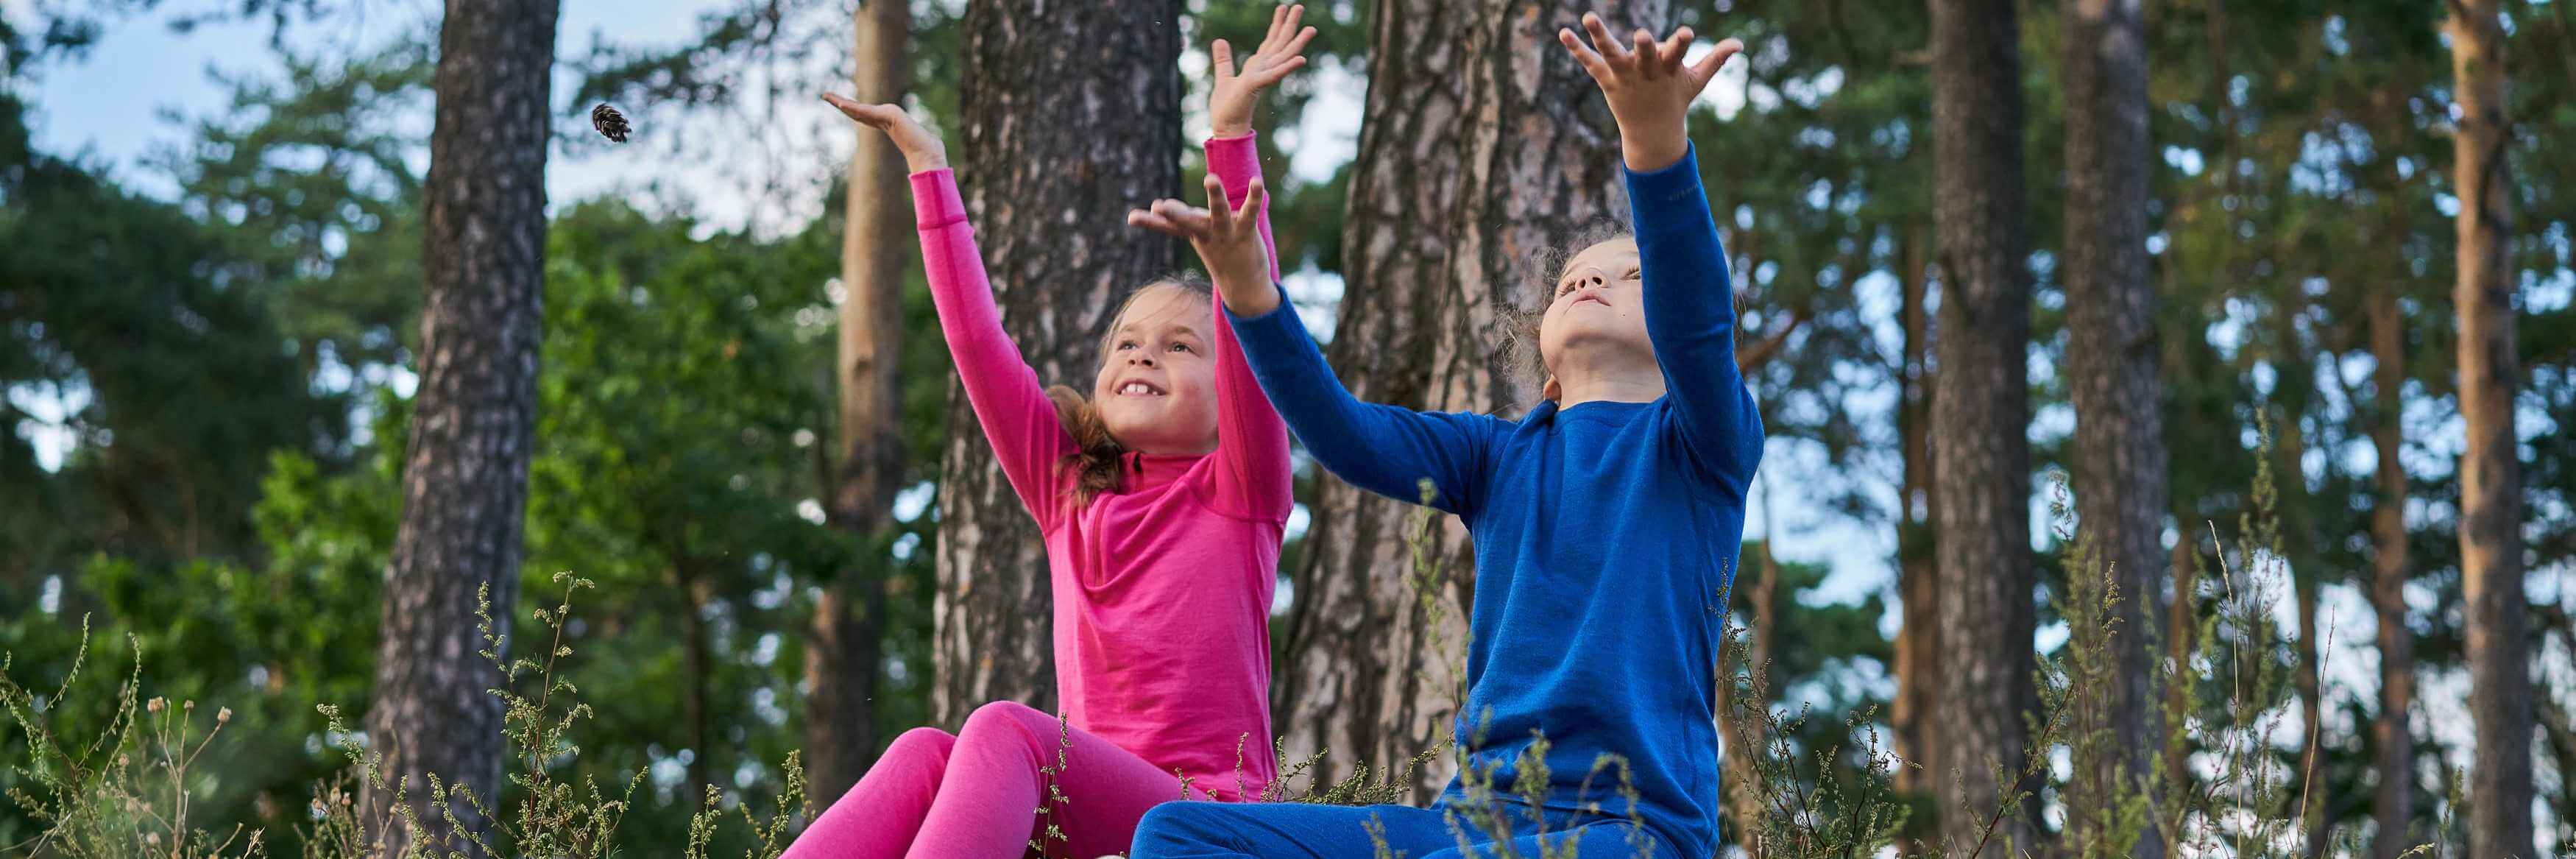 A girl and boy are wearing colorful thermo clothes on the grounds and enjoying nature